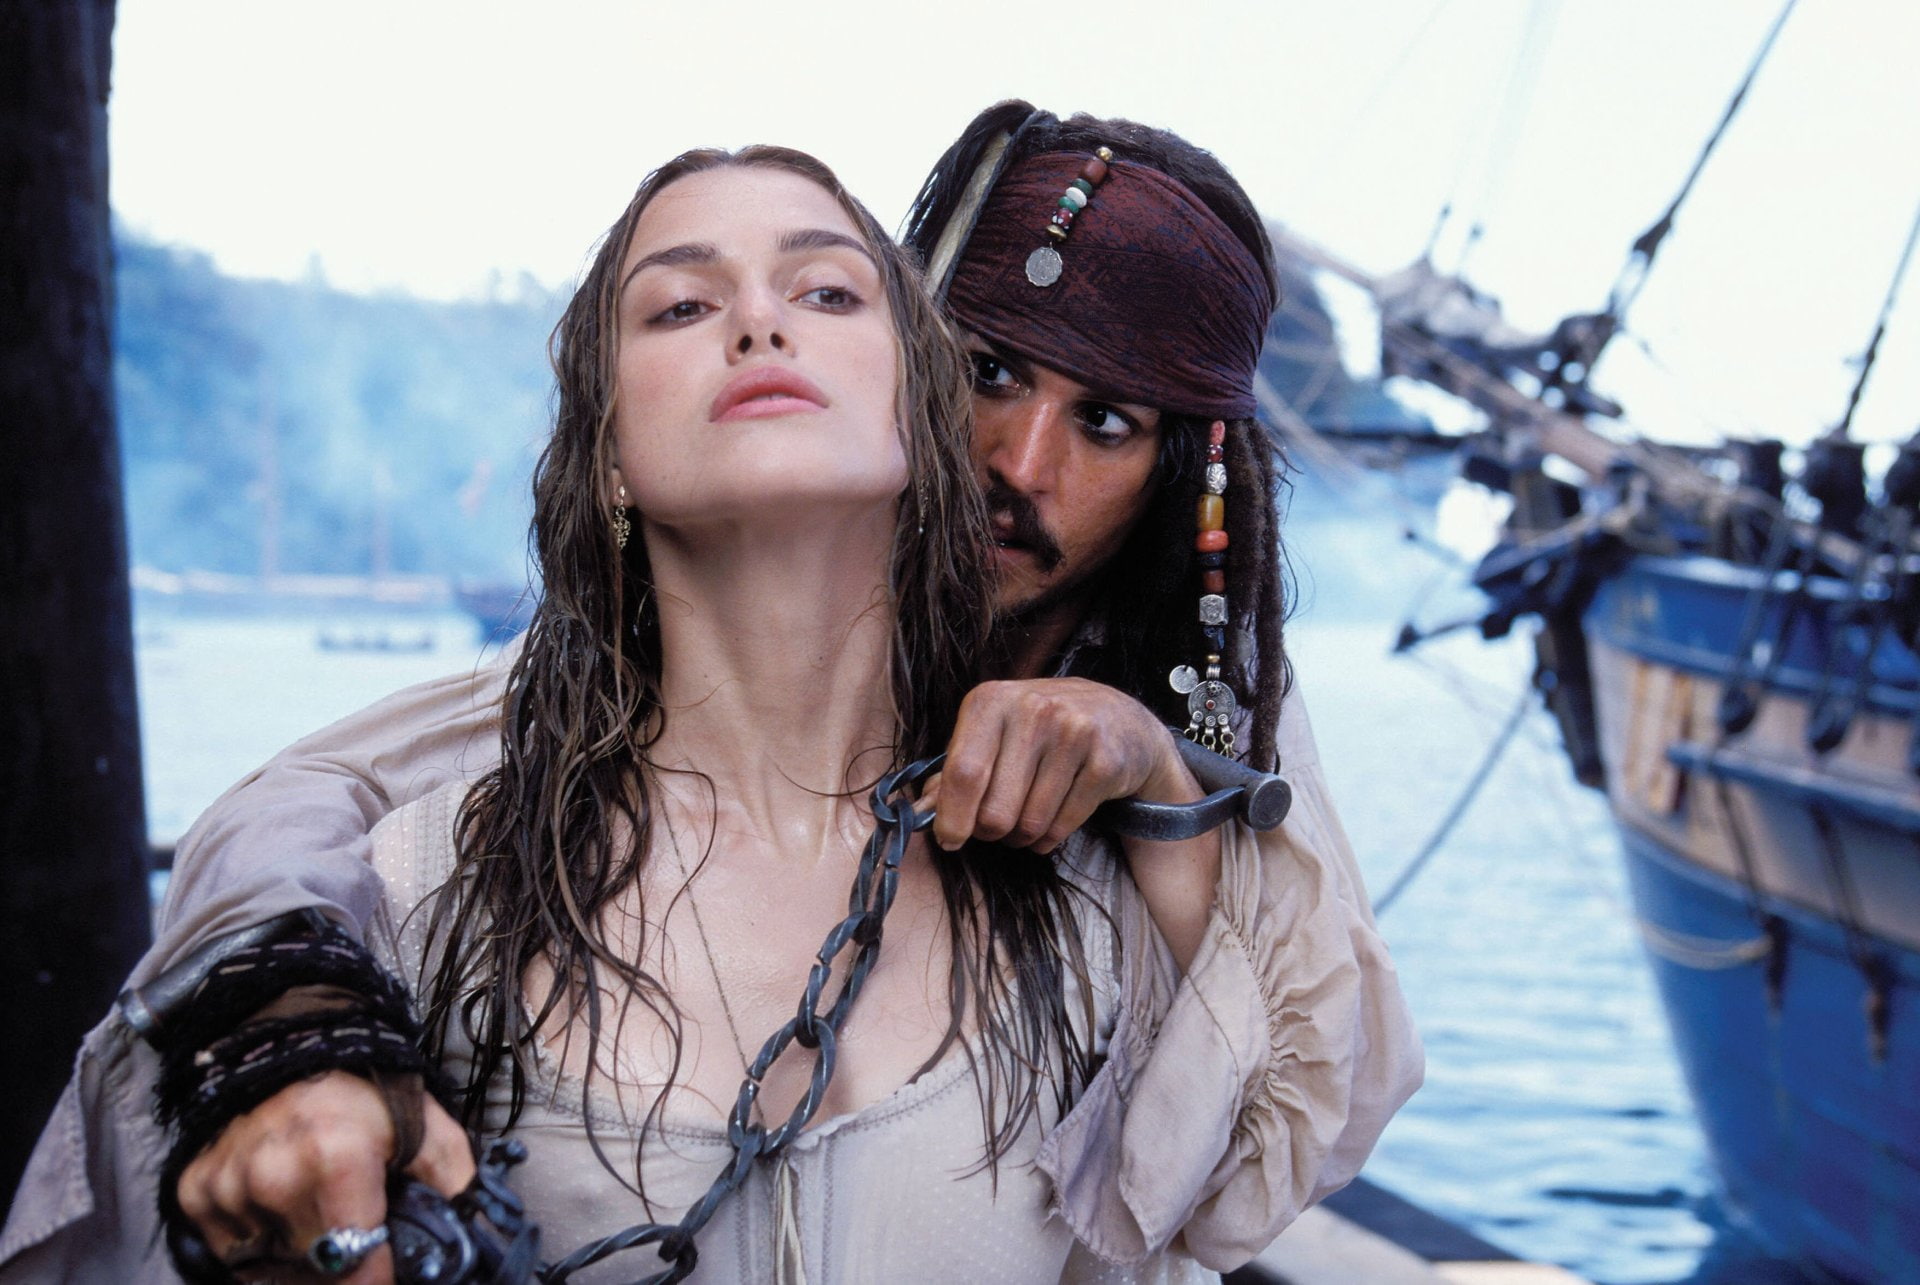 Pirates Of The Caribbean, Pirates Of The Caribbean: The Curse Of The Black Pearl